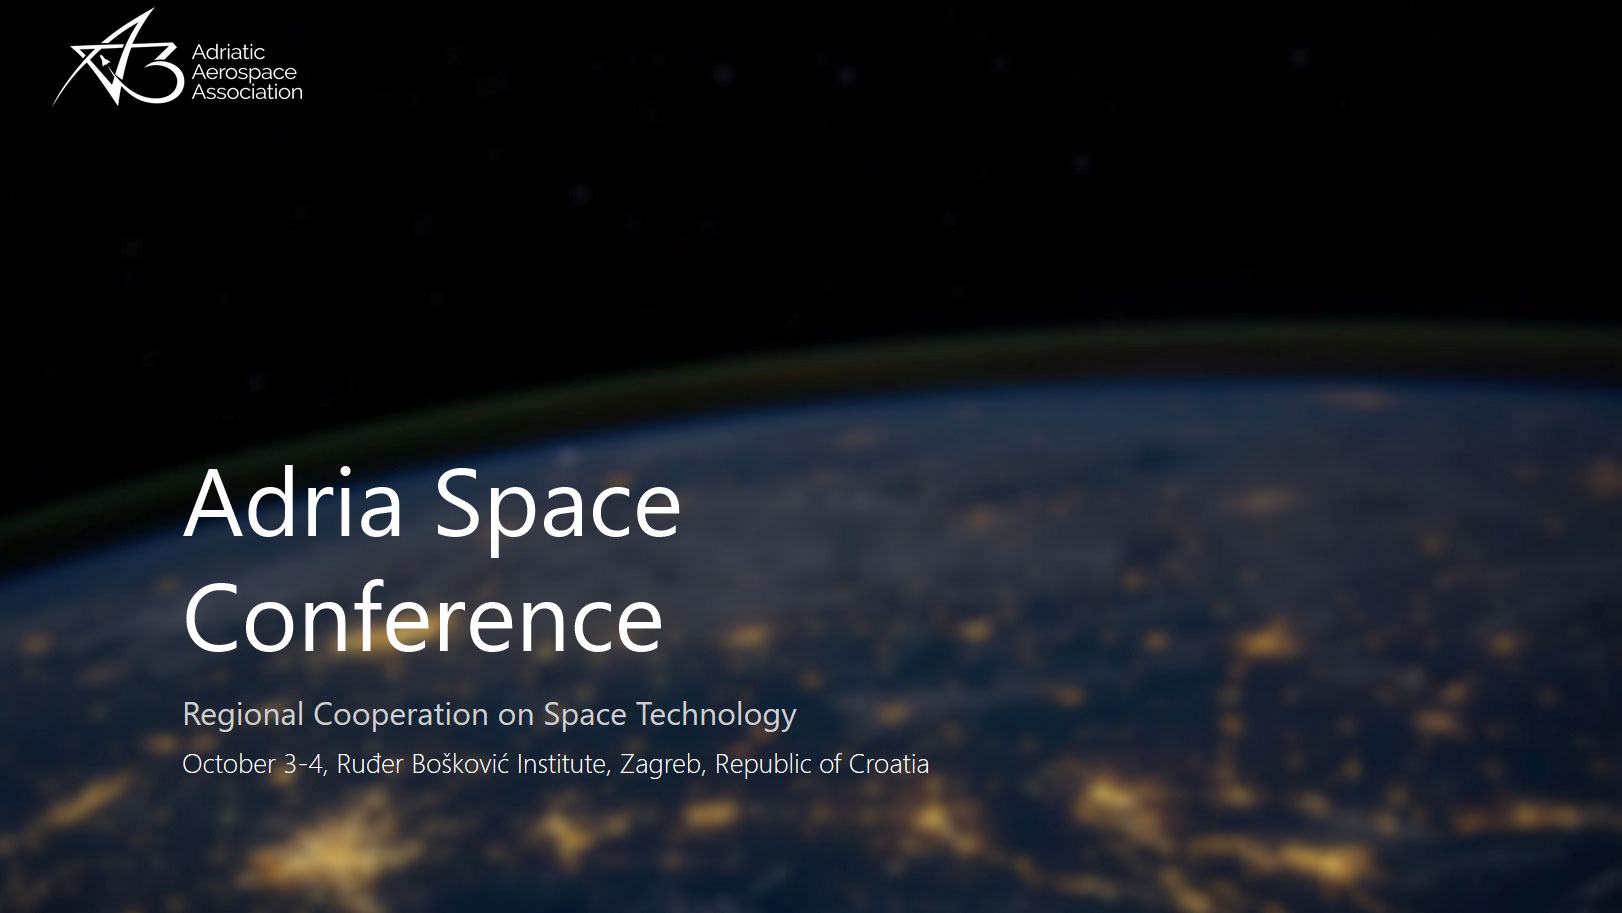 Adria Space Conference